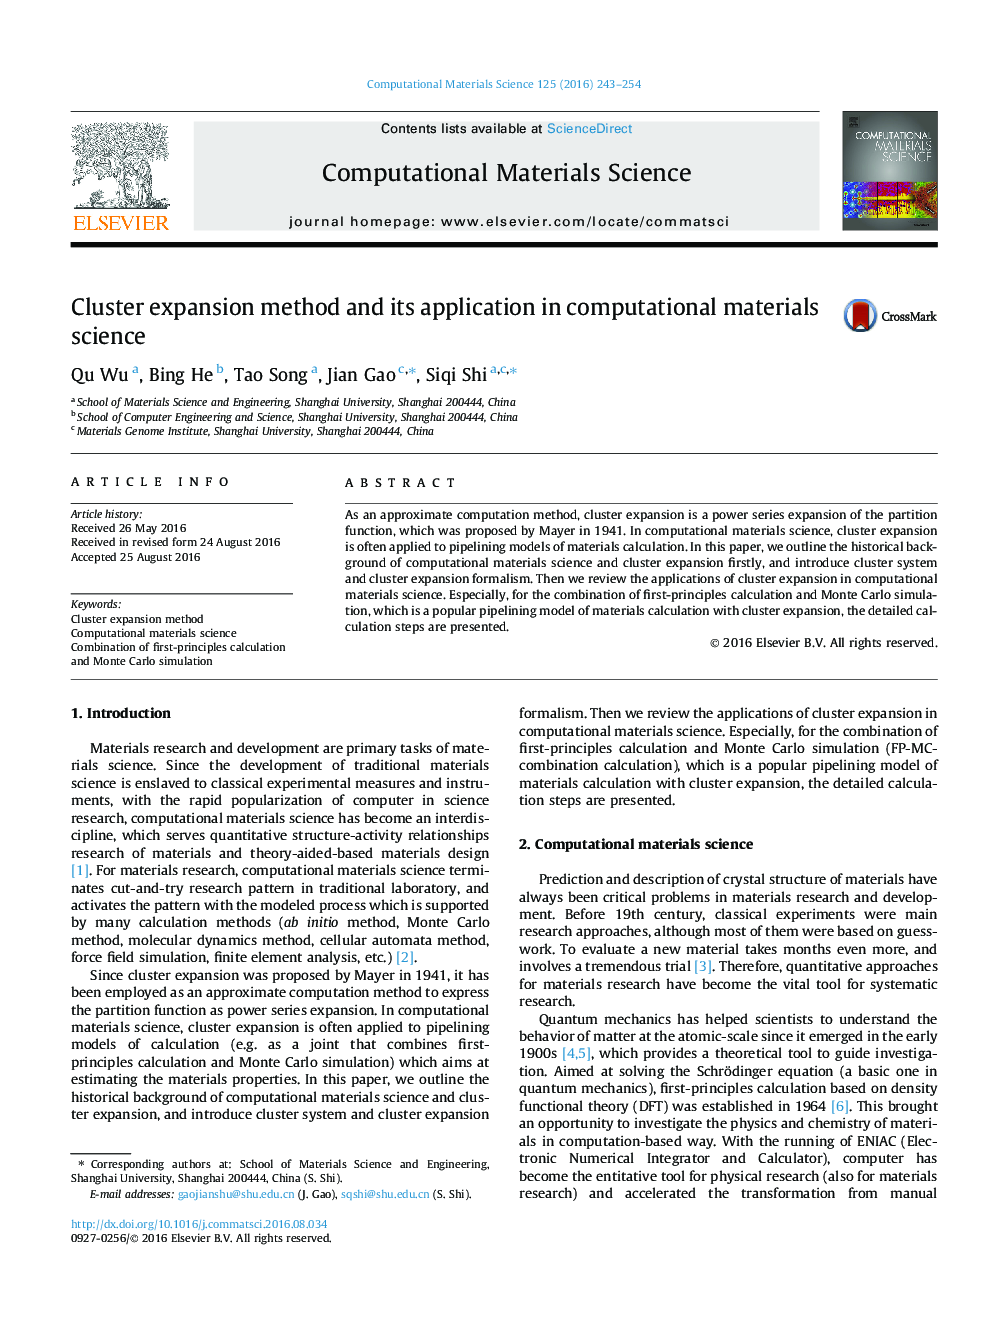 Cluster expansion method and its application in computational materials science